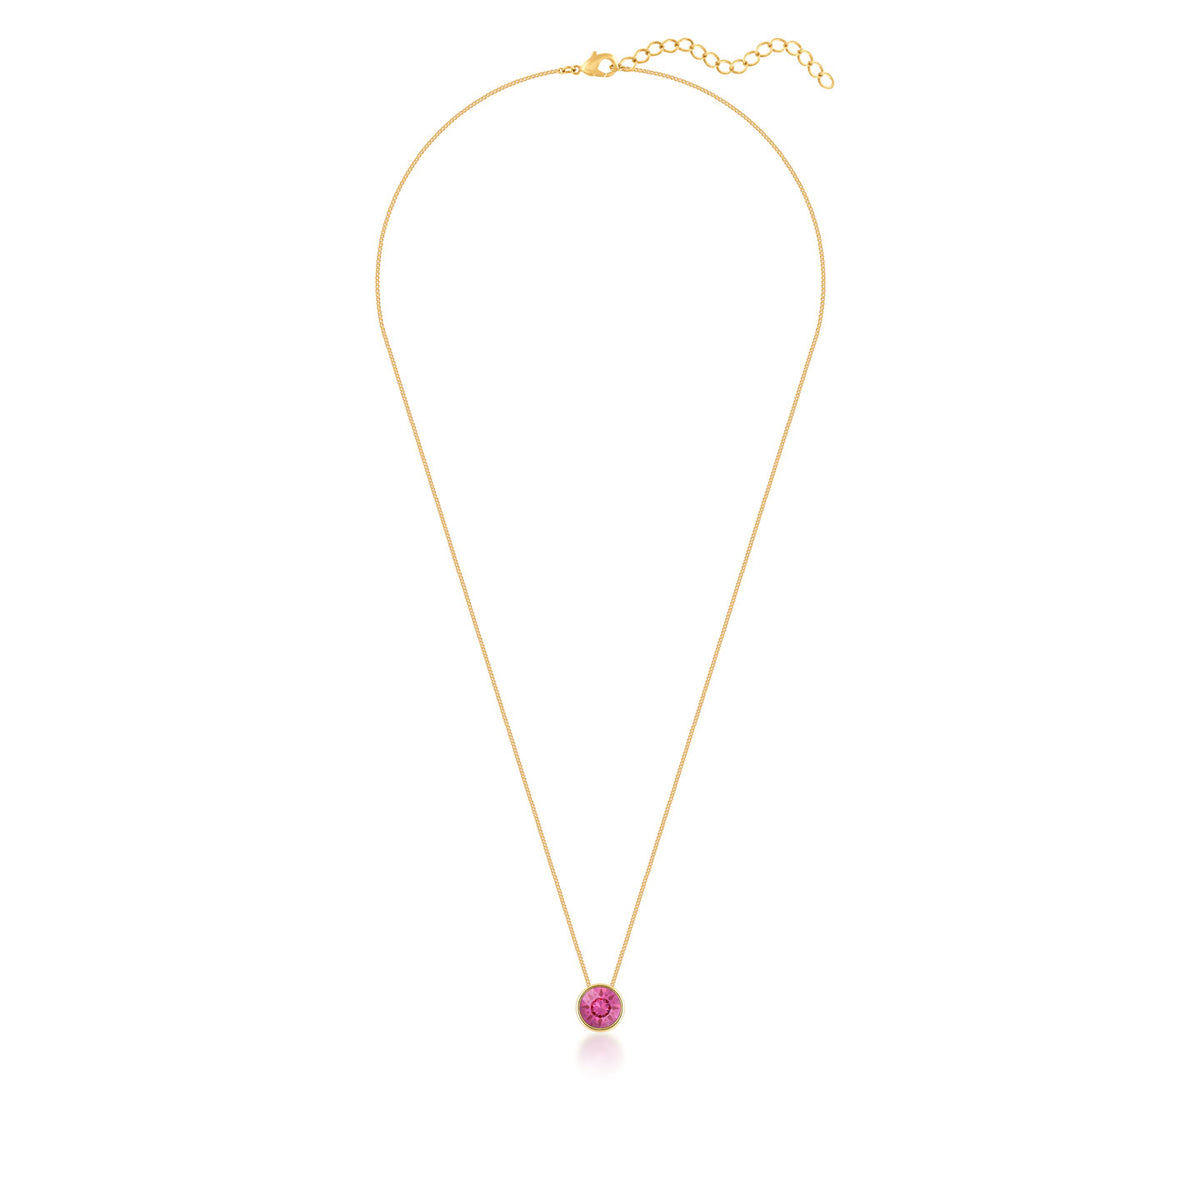 Harley Small Pendant Necklace with Pink Rose Round Crystals from Swarovski Gold Plated - Ed Heart